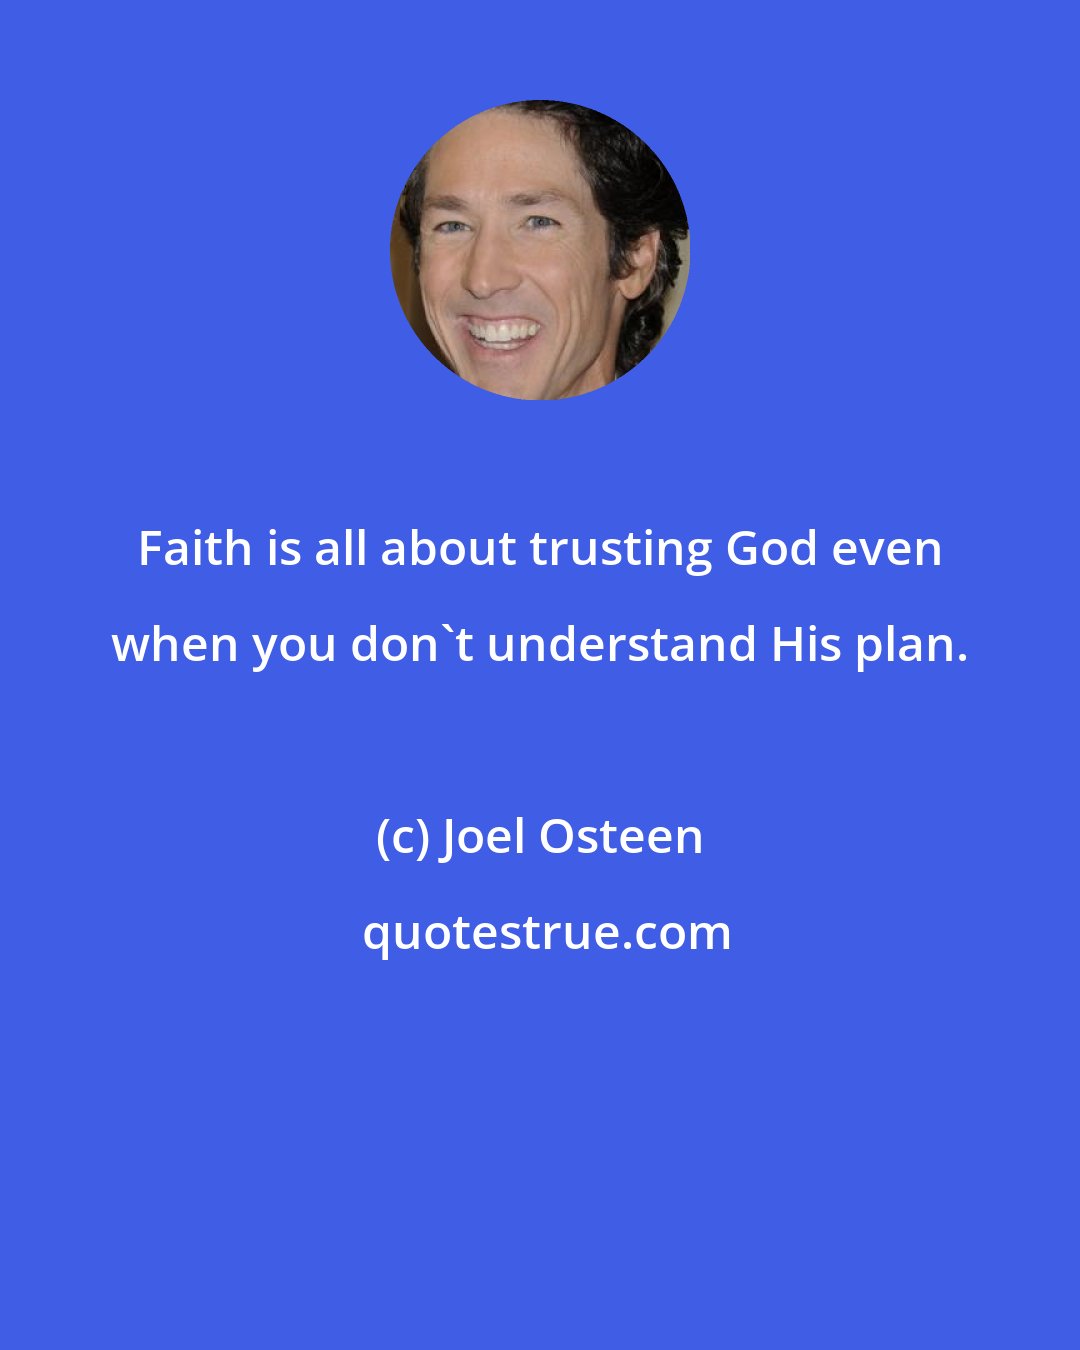 Joel Osteen: Faith is all about trusting God even when you don't understand His plan.